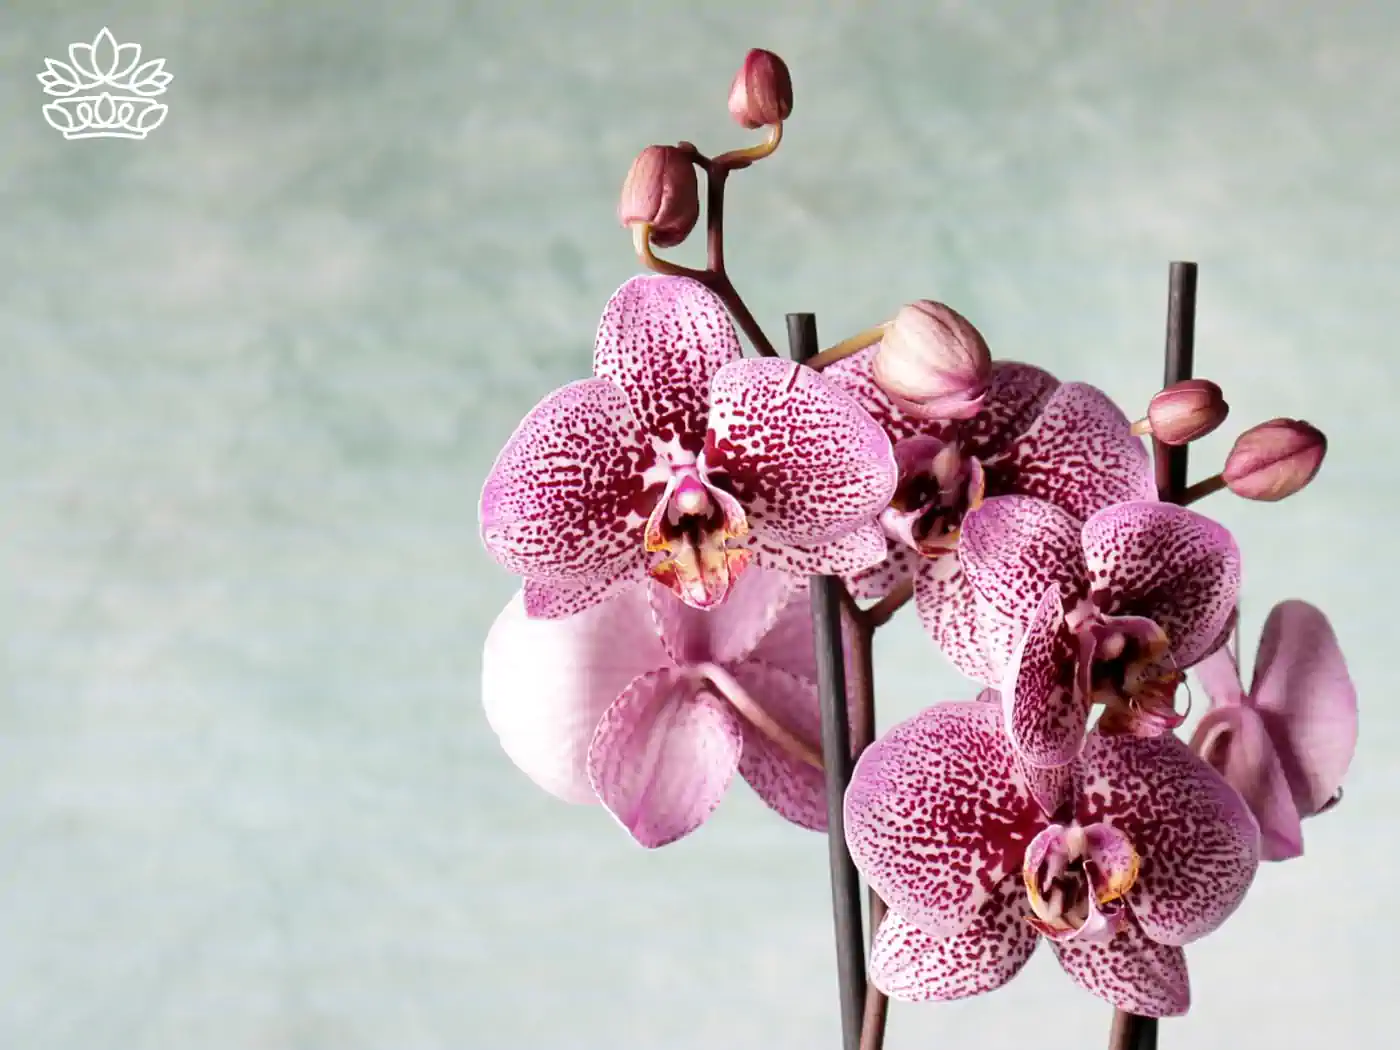 Close-up of pink speckled orchids with detailed petals against a light green background. Fabulous Flowers and Gifts - Orchids Collection.